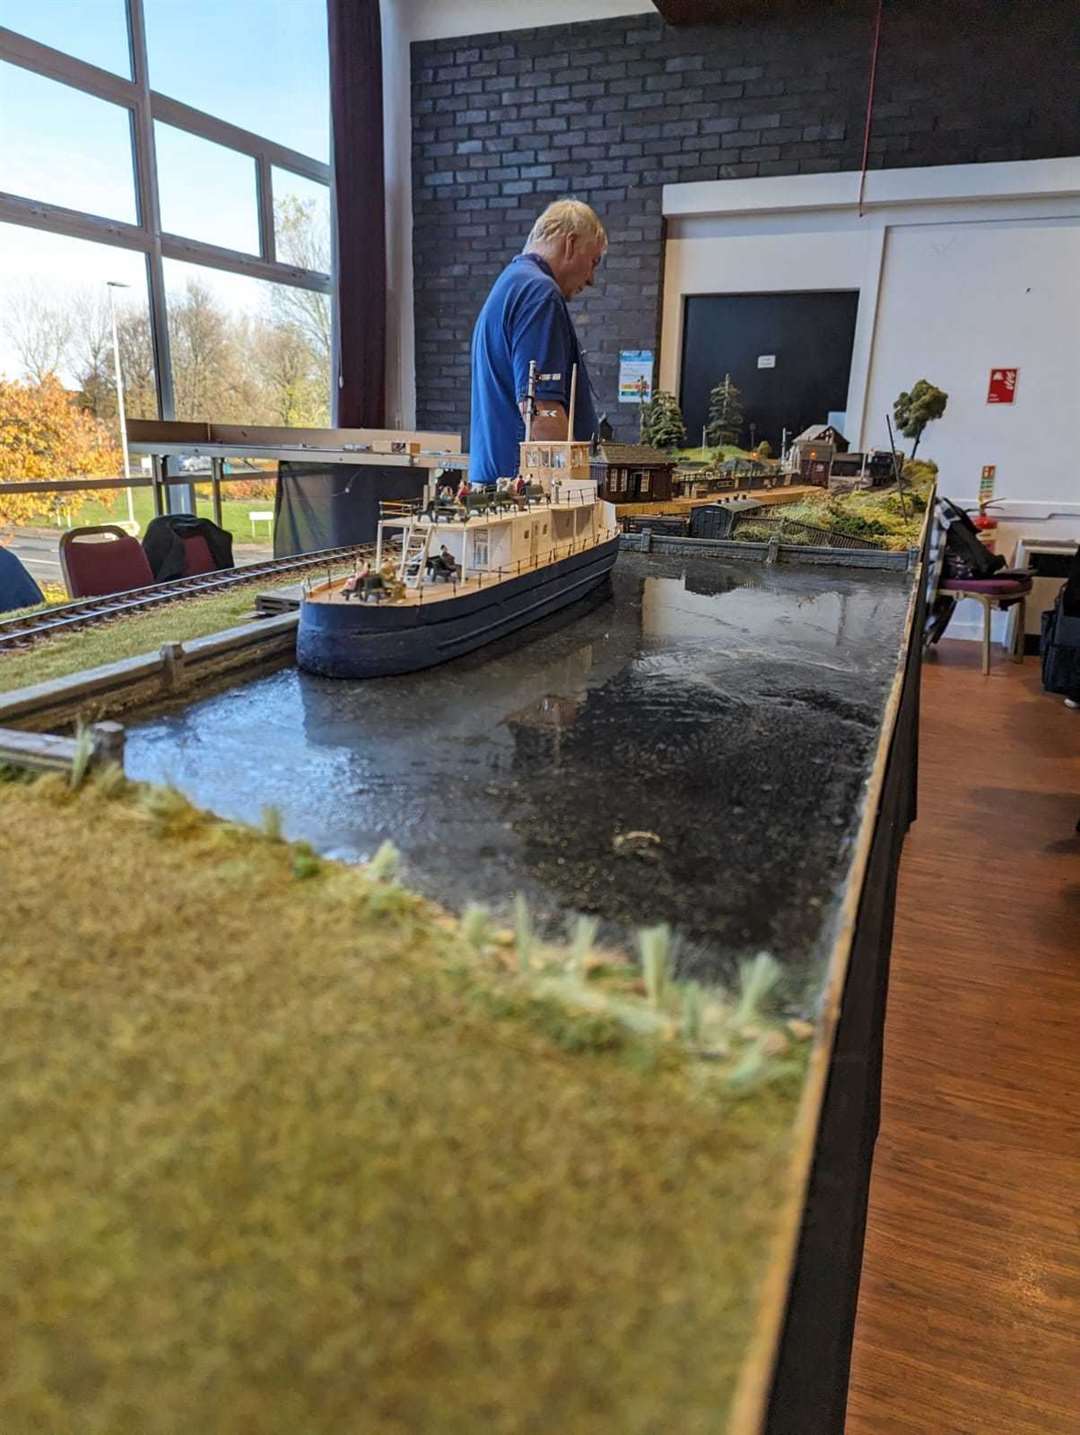 The Loch End layout, which was built by Frank Martin and operated by Frank, Graeme Swanson, Colin Walker and Gerry Parks. Graeme is the operator in the photo.